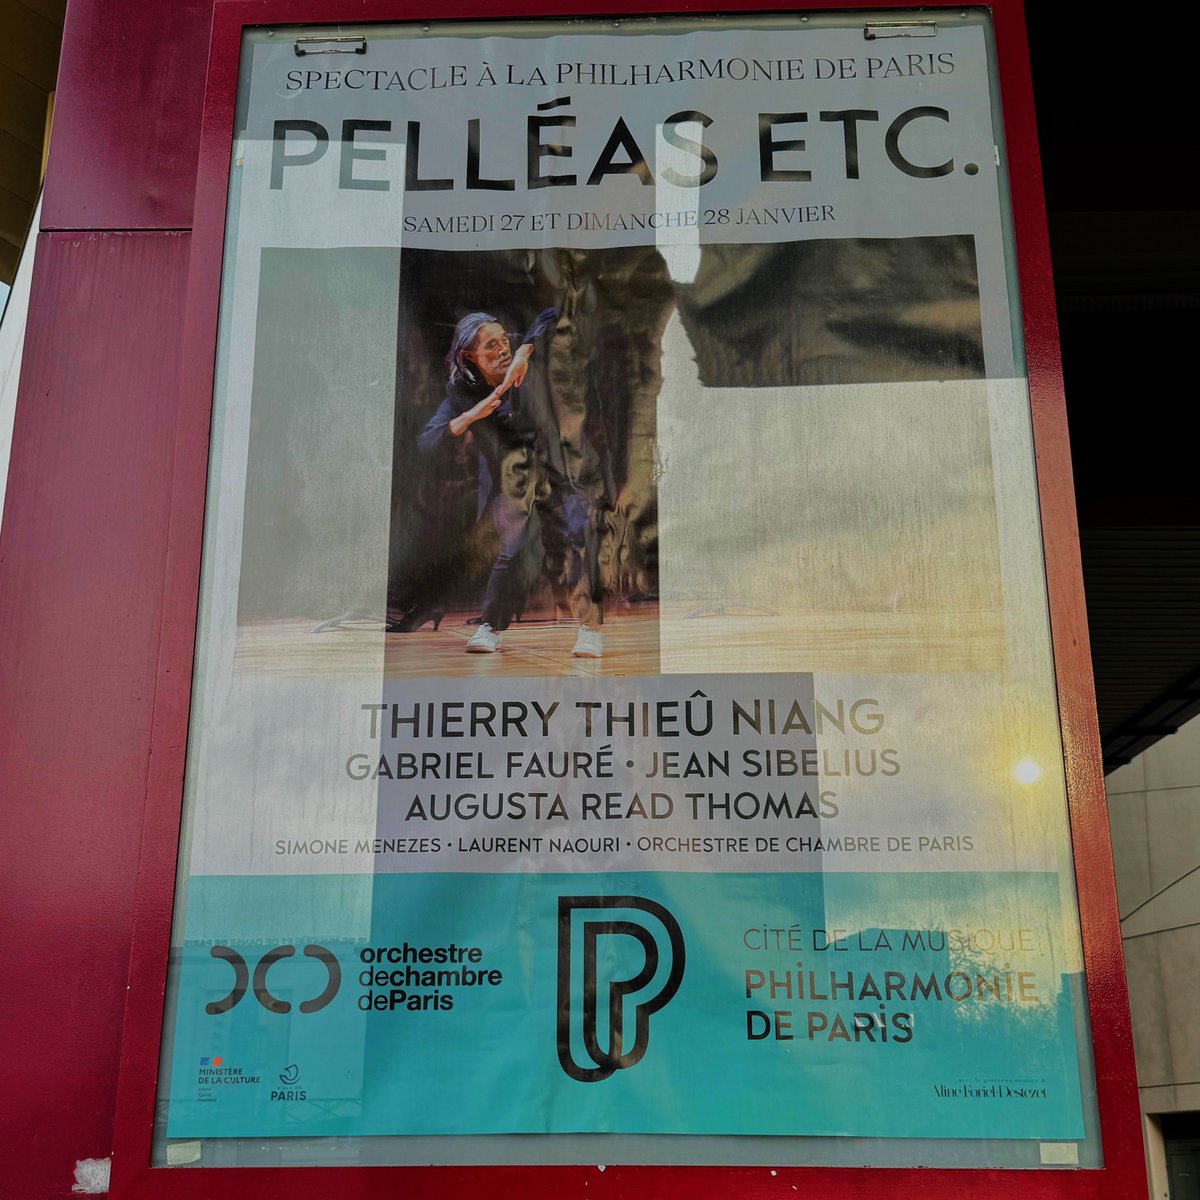 A quick snapshot of our poster advertising last nights performance in Paris. I really hope everyone who joined us enjoyed it!

#music #musician #Paris #composer #composition #event #performance #livemusic #GabrielFaure #PhilharmonieDeParis